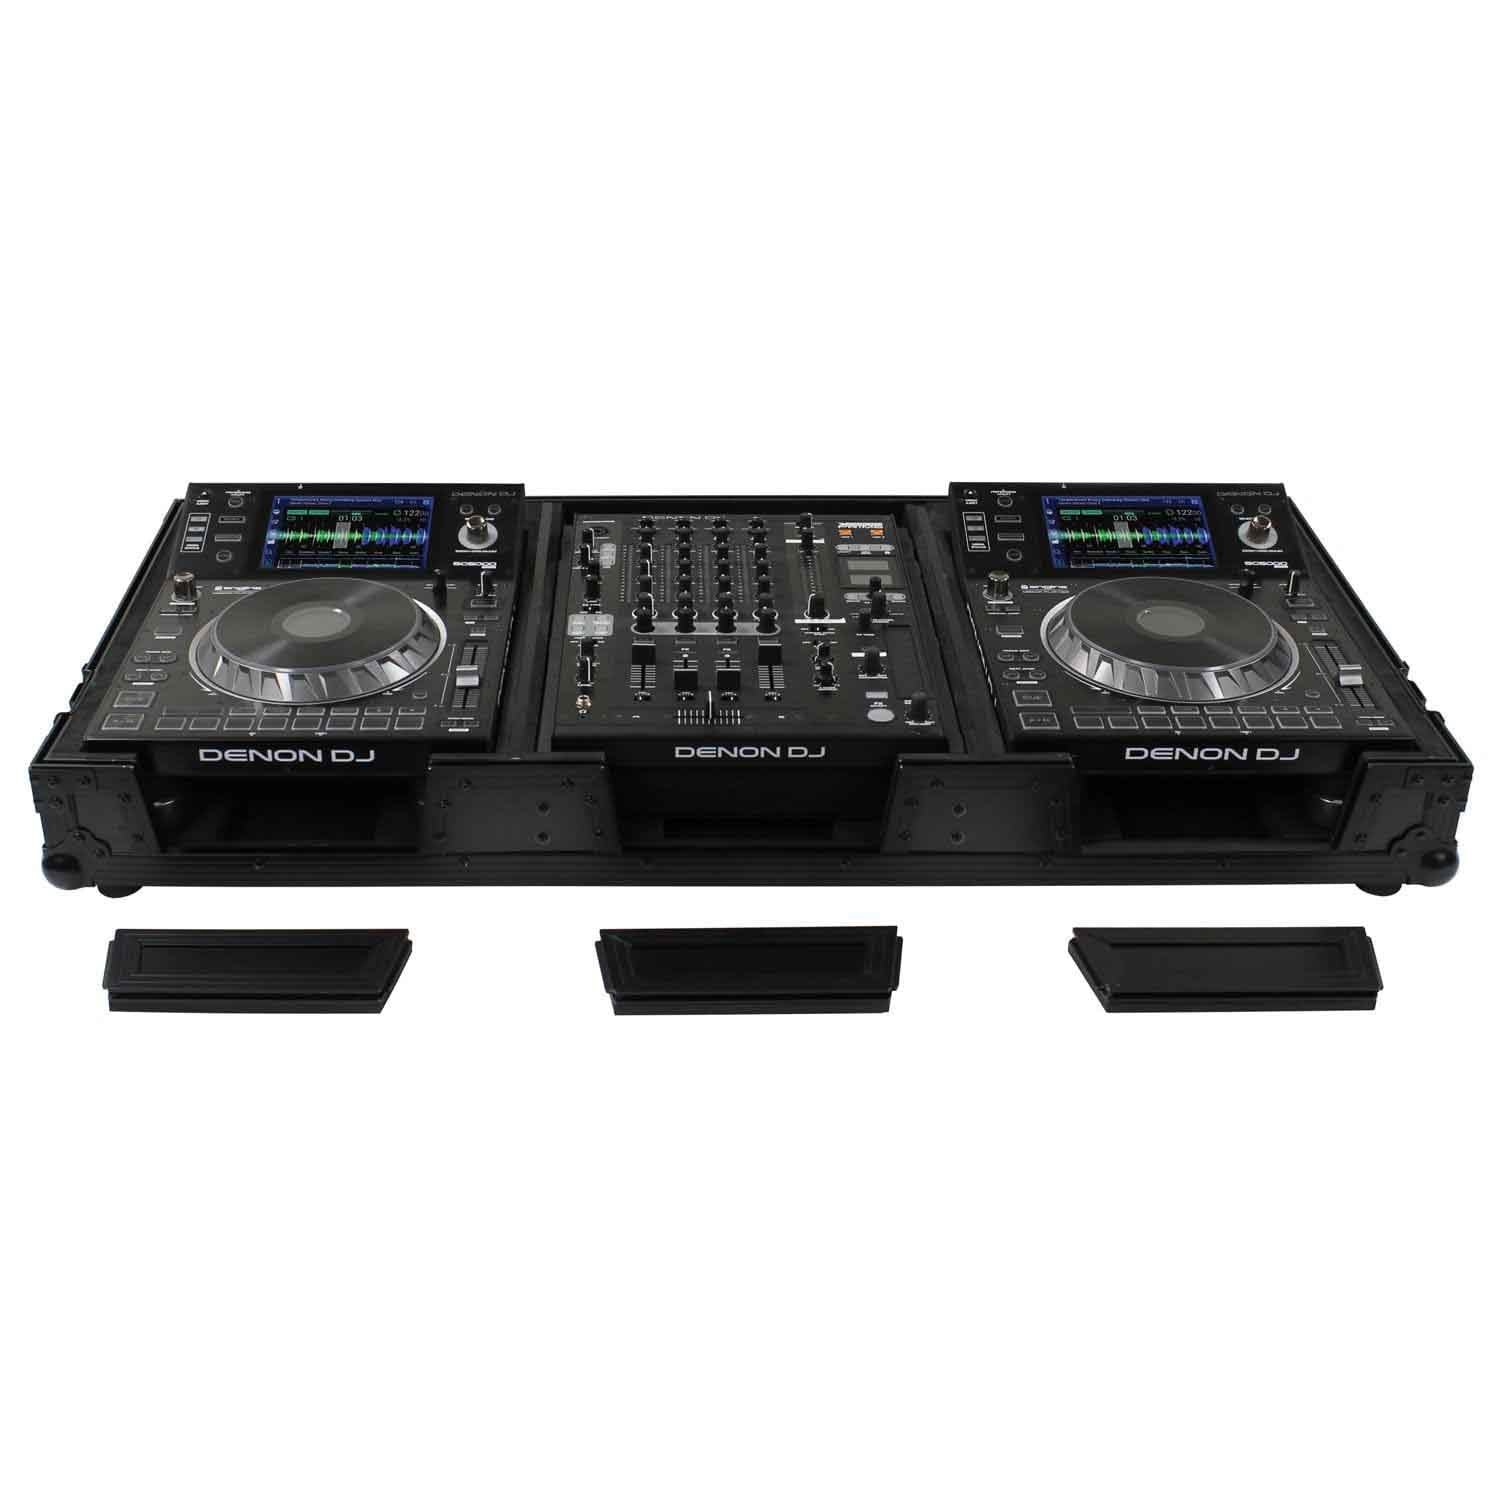 CDJ3000 Club DJ Package with DJM-900NXS2, QSC Speakers, Pro Case, Speaker Stands and Accessories - Black - Hollywood DJ